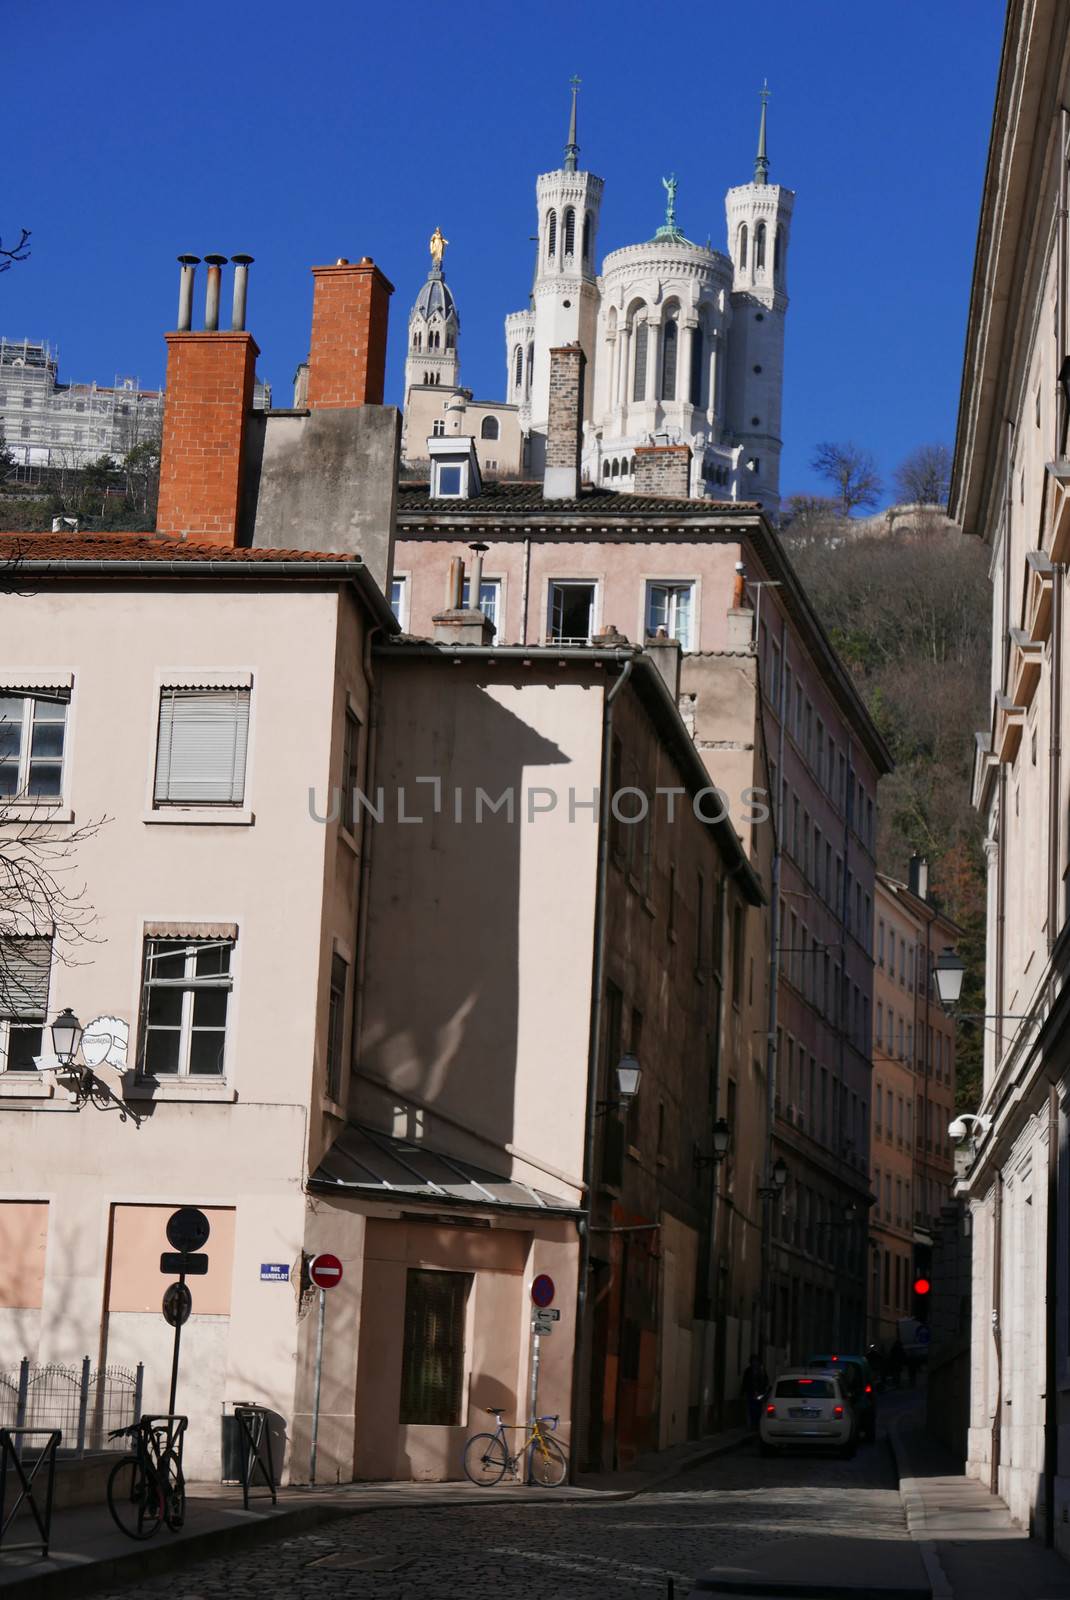 Tourism in the city of lyon, rhone alpes region in france